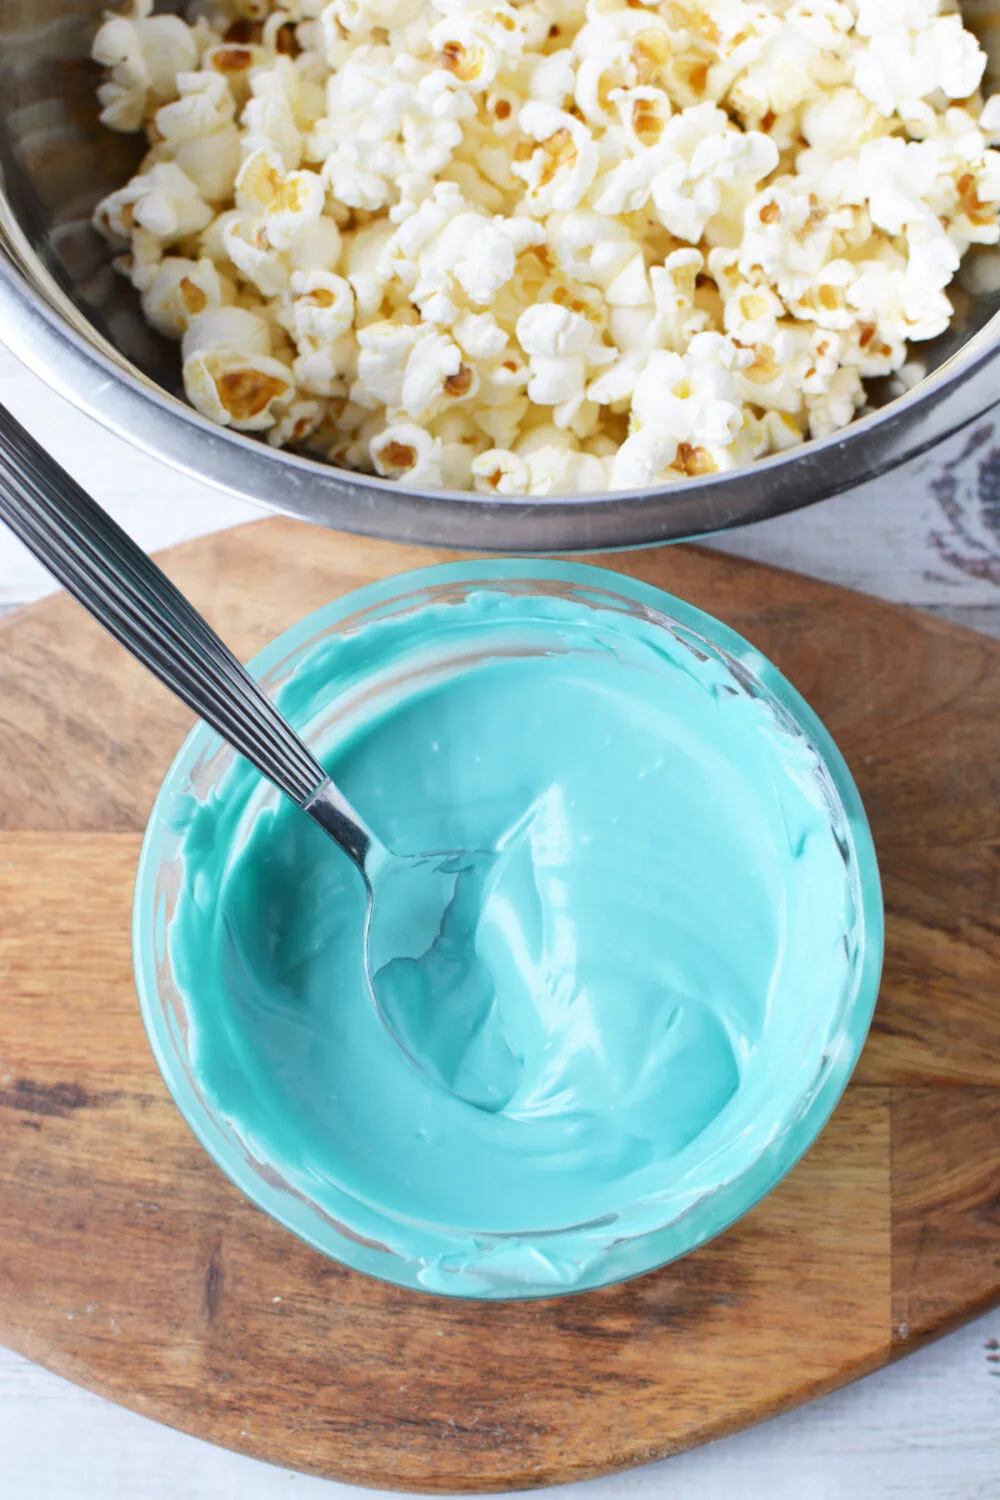 Melted blue candy melts in a bowl next to popcorn.